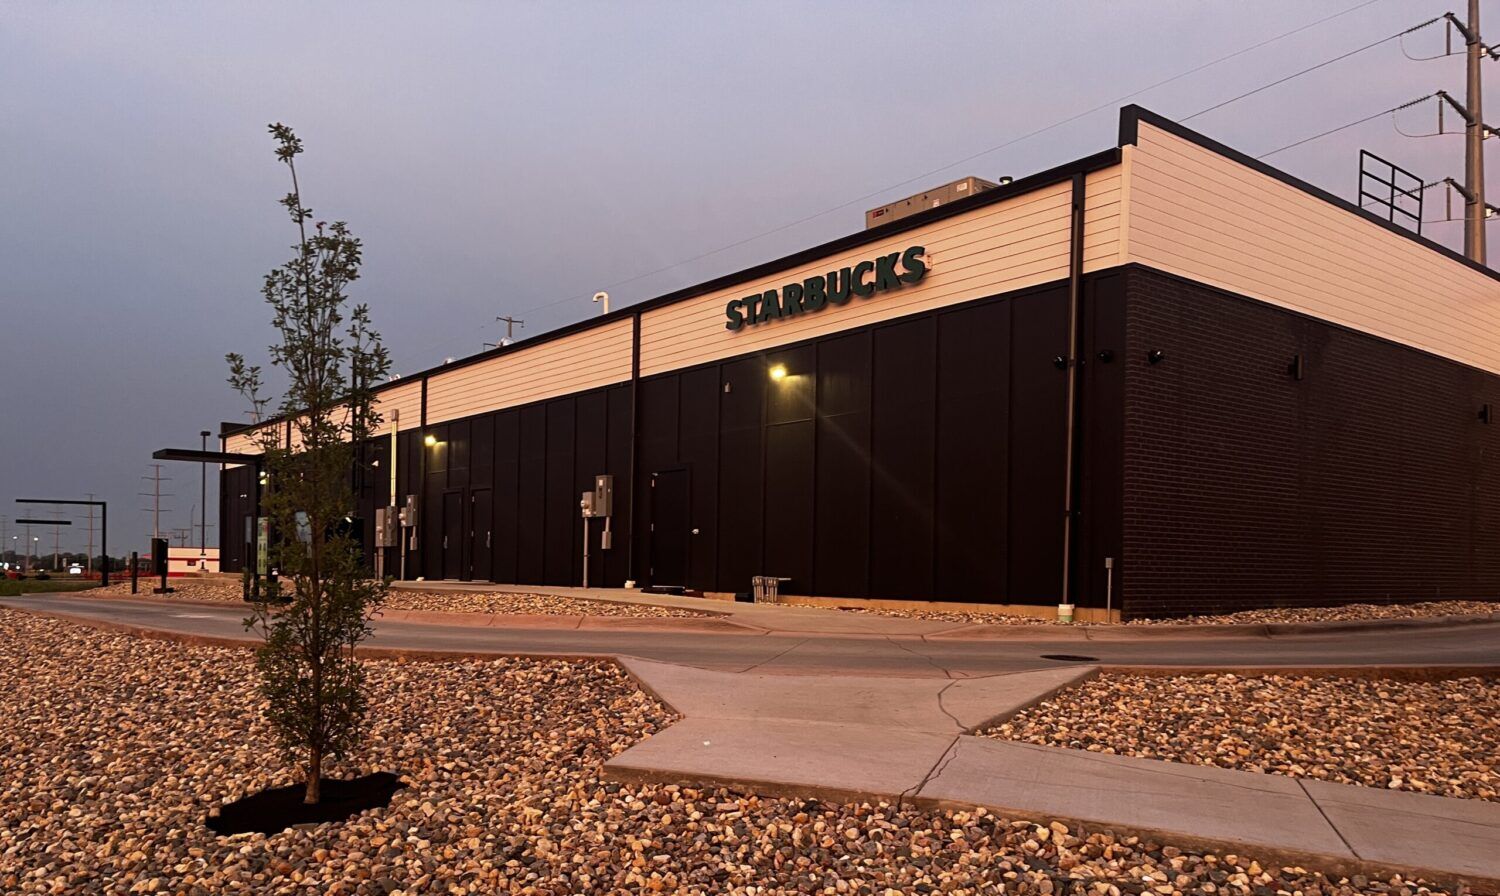 Starbucks union proposal arises as states rate of organized labor hits historic low State News mykxlg pic